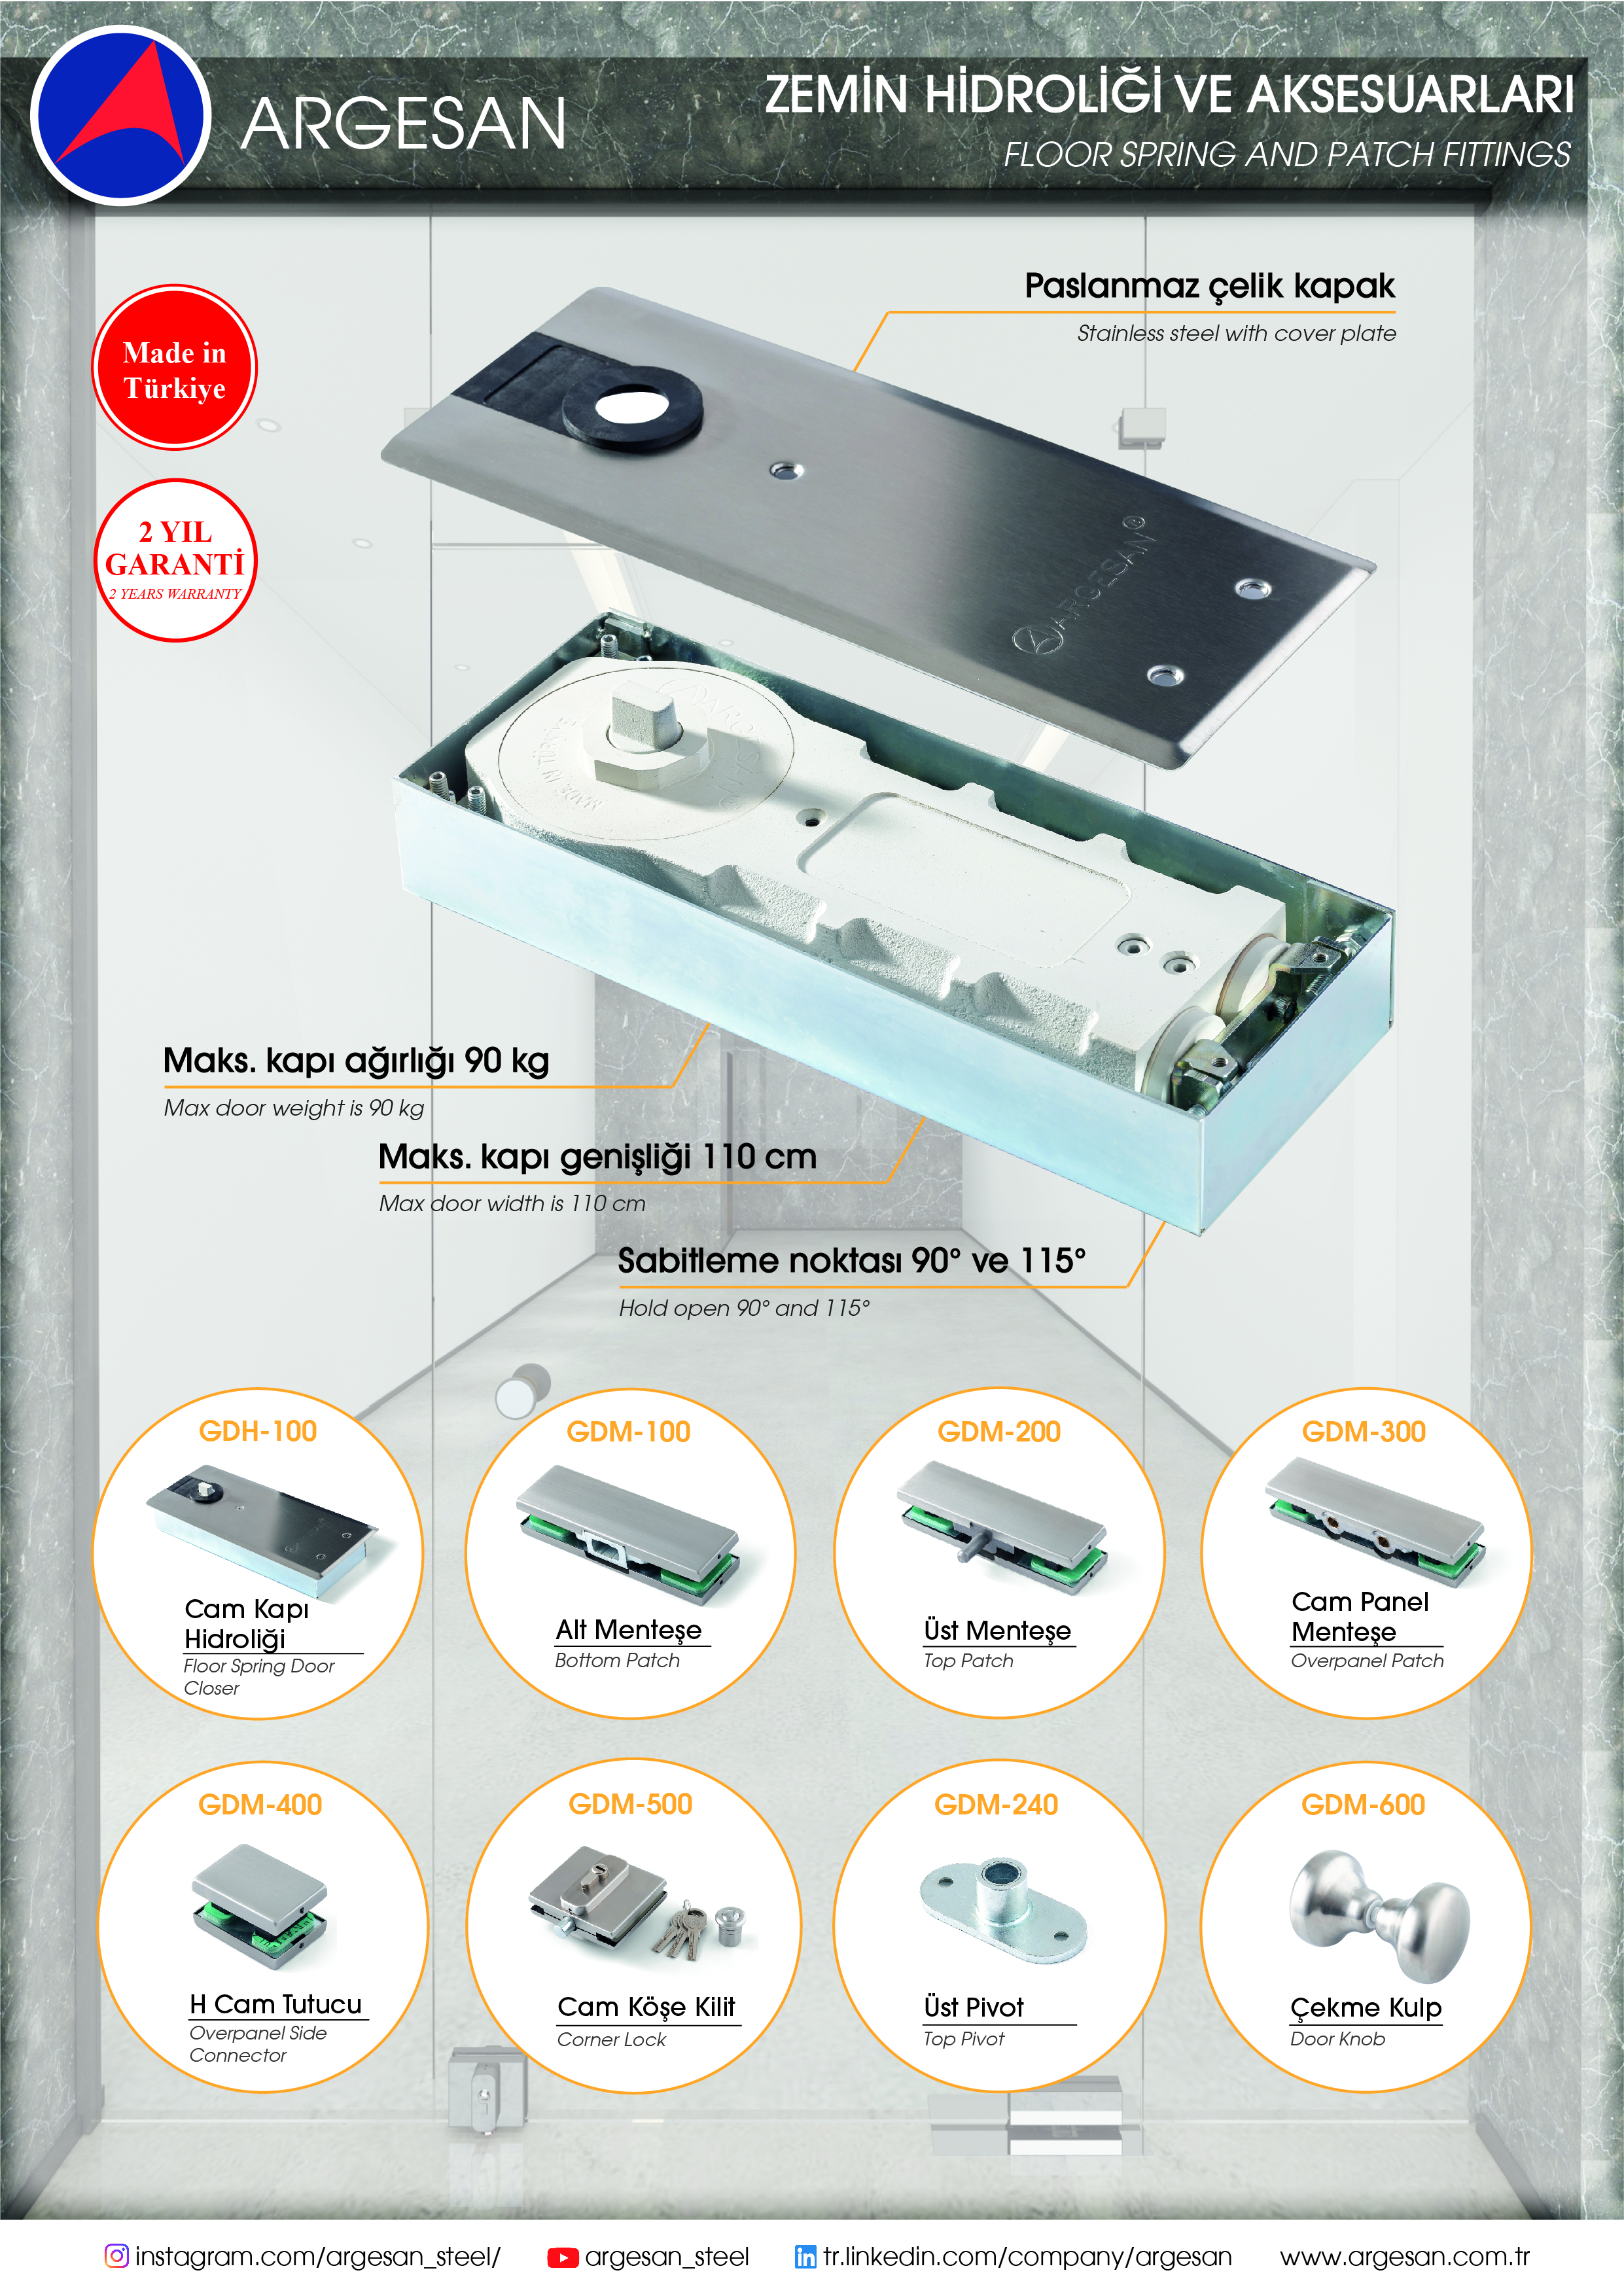 Floor Spring and Patch Fittings Brochure